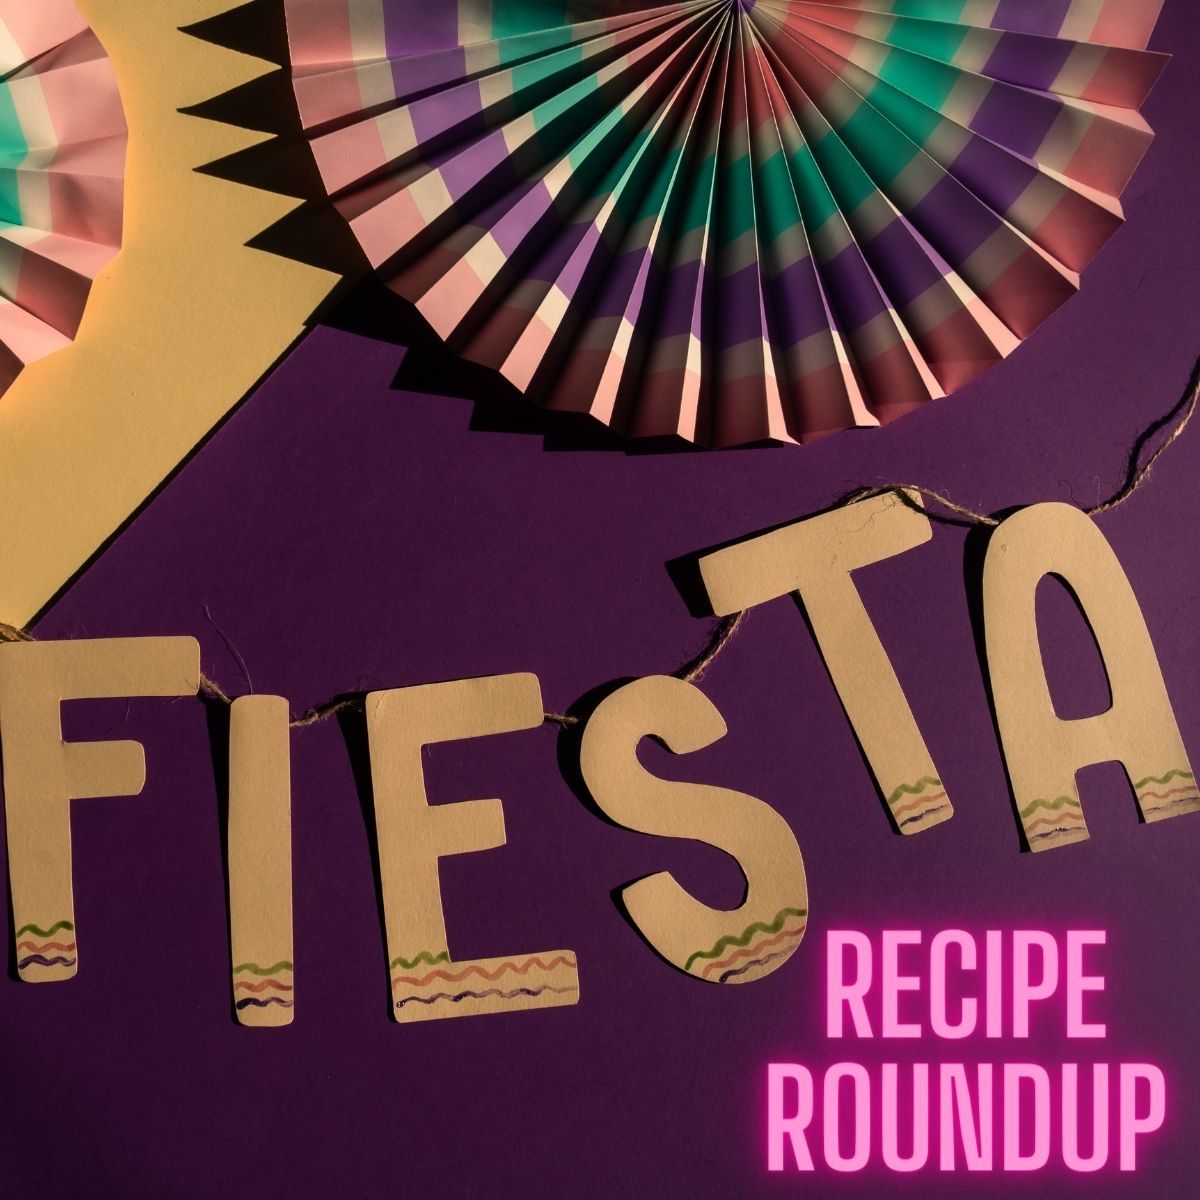 33 Easy Recipes for Your Fiesta Party